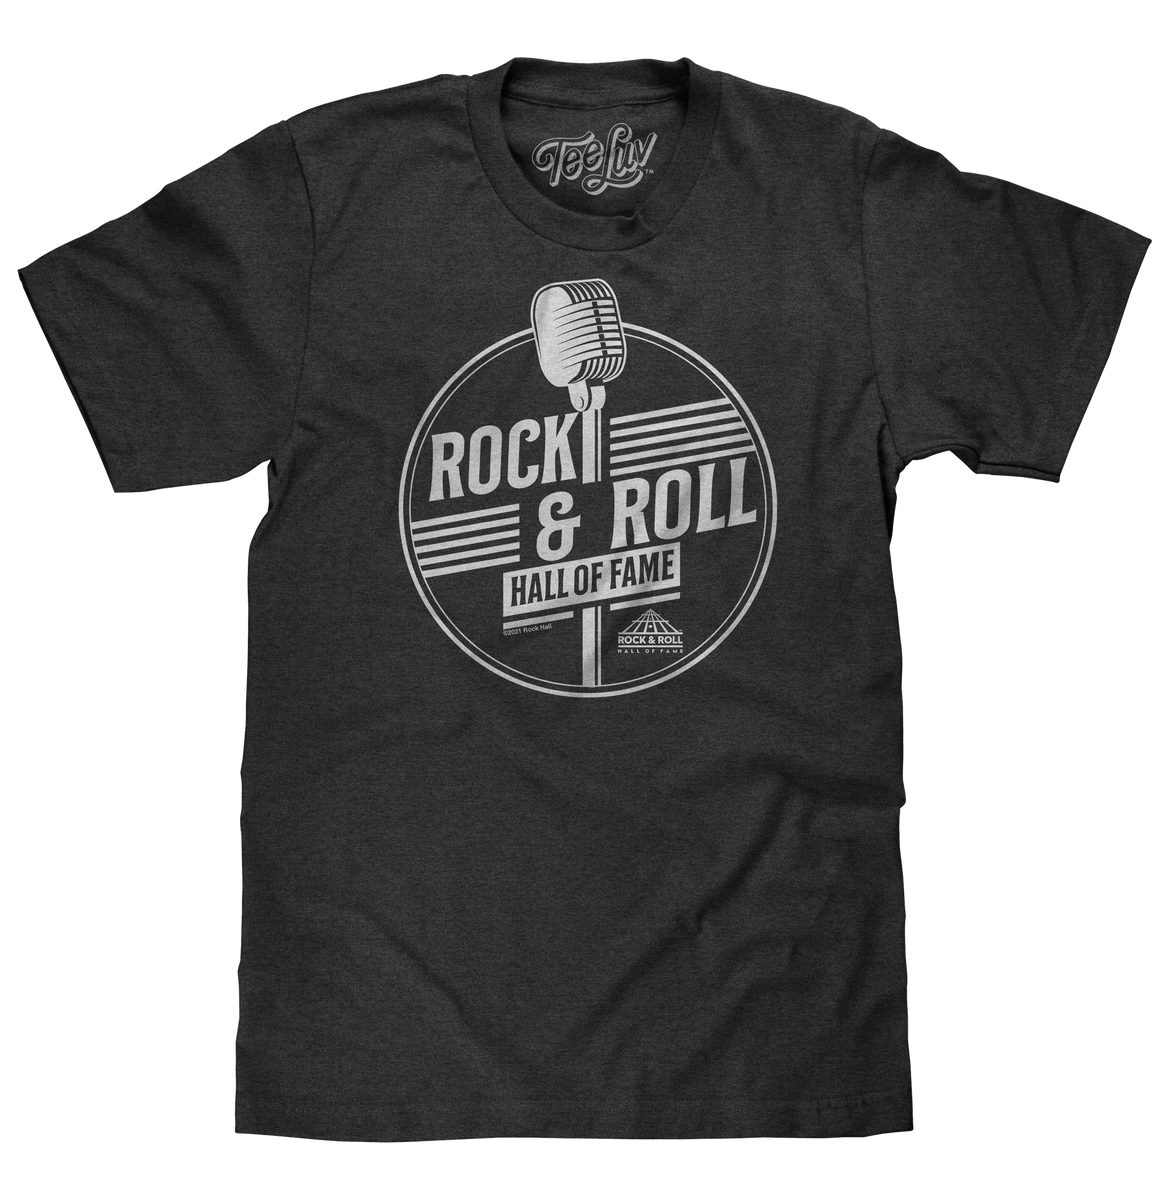 Rock and Roll Hall of Fame Retro Microphone T-Shirt - Charcoal Gray Heather